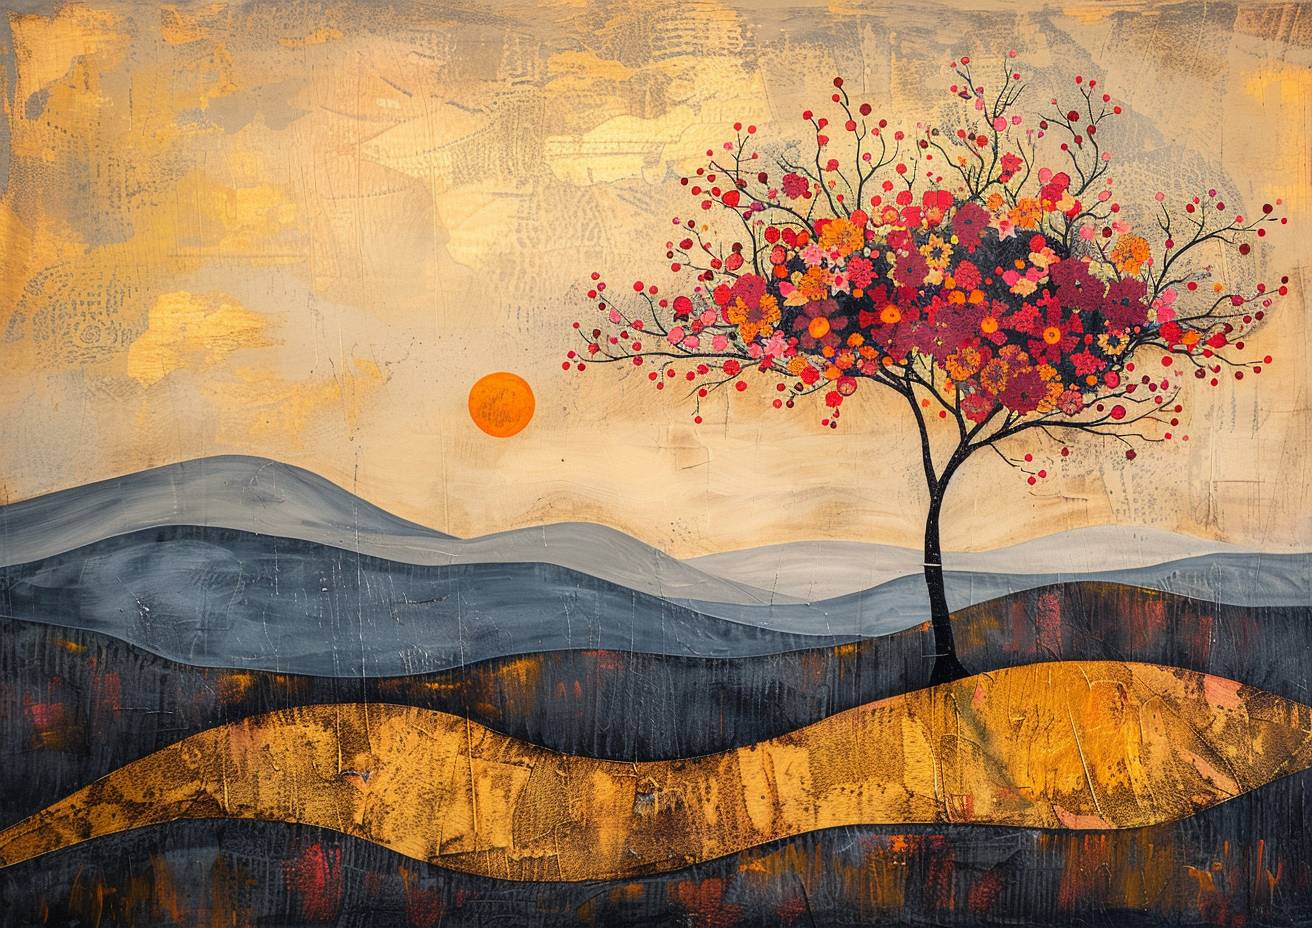 Minimalist abstract painting, a young wild cherry tree with colorful fruit, rolling hills, sunshine isolated in negative space, dry brushed with colorful chalk and charcoal, black marker outlines, gold foil accents, muted palette